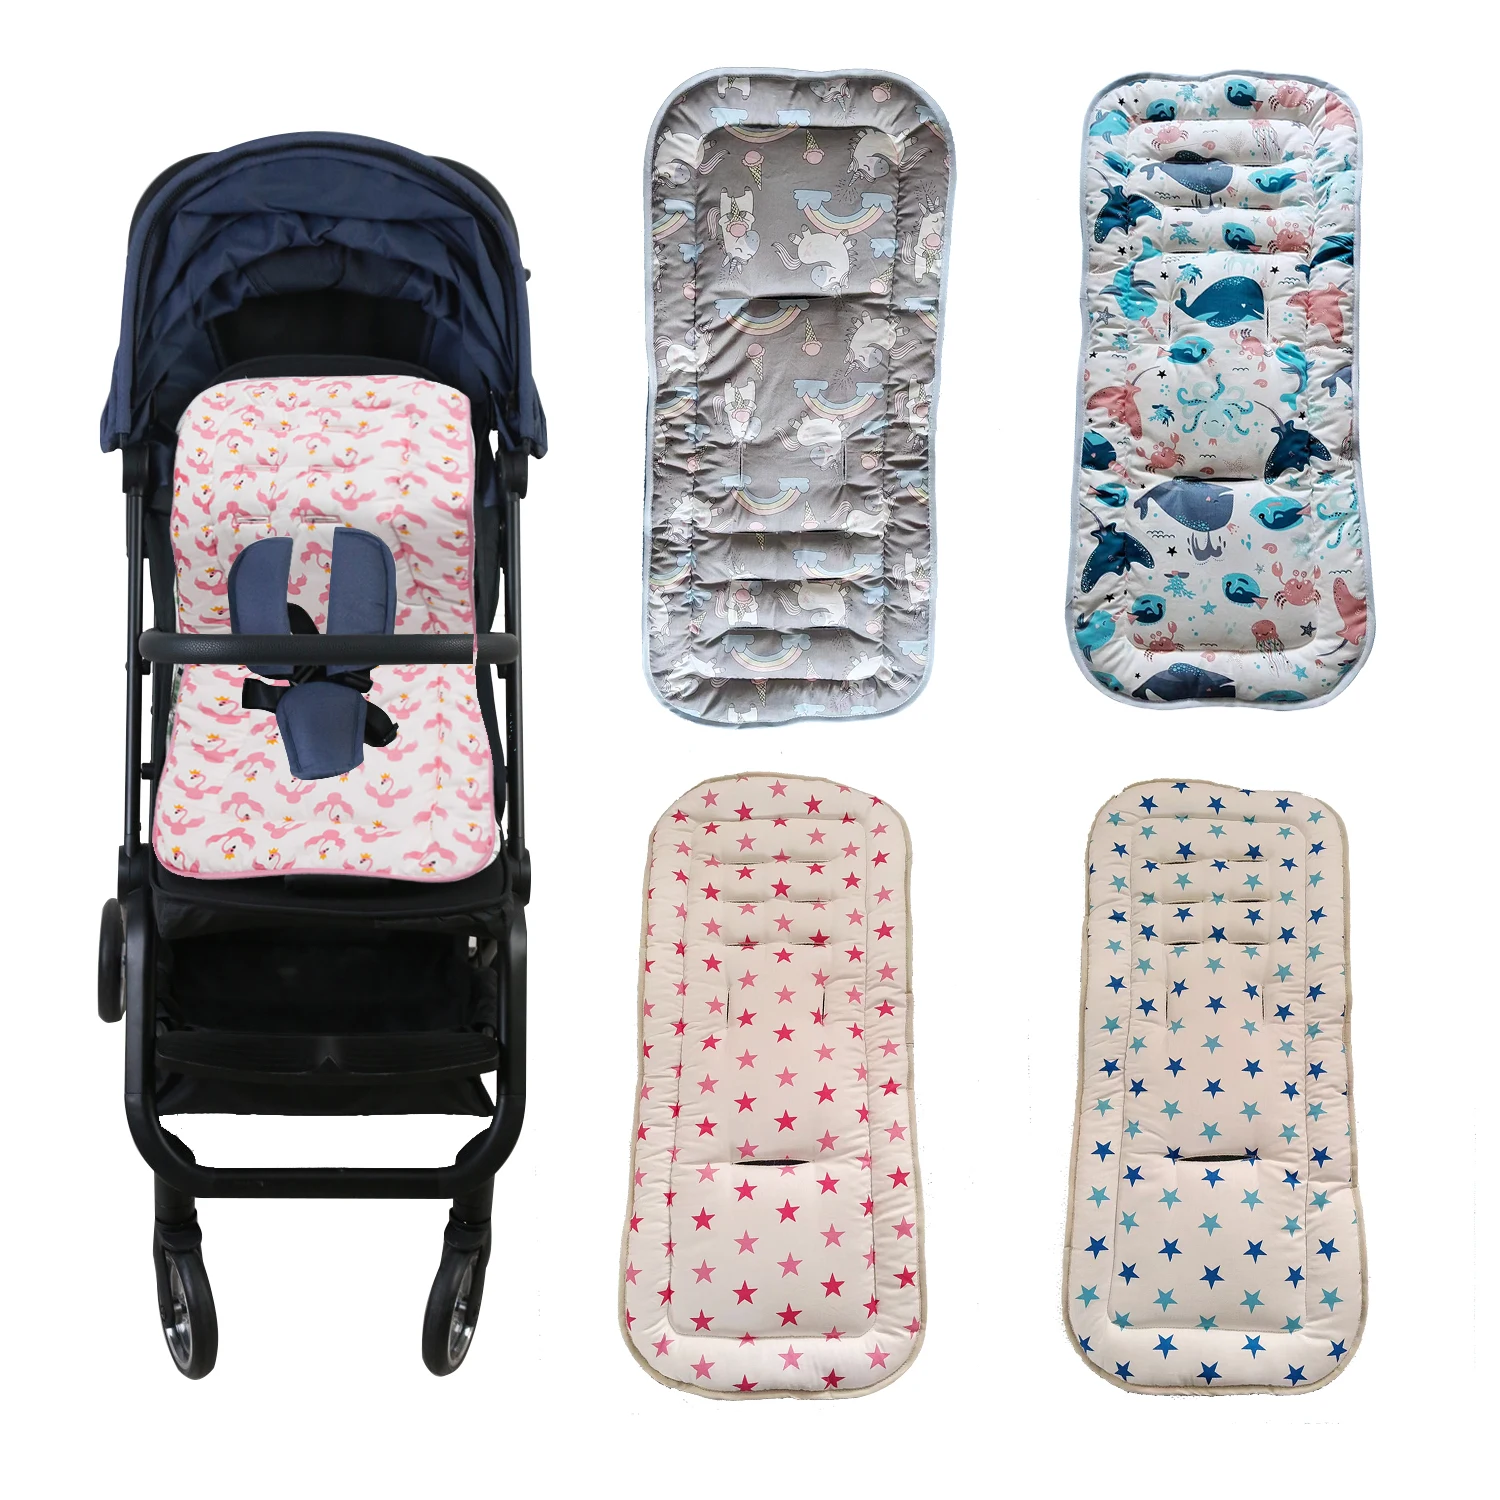 

Stroller Seat Liner for Baby Pushchair Car Cart Chair Mat Child Trolley Mattress Diaper Pad Infant Stroller Cushion Accessories